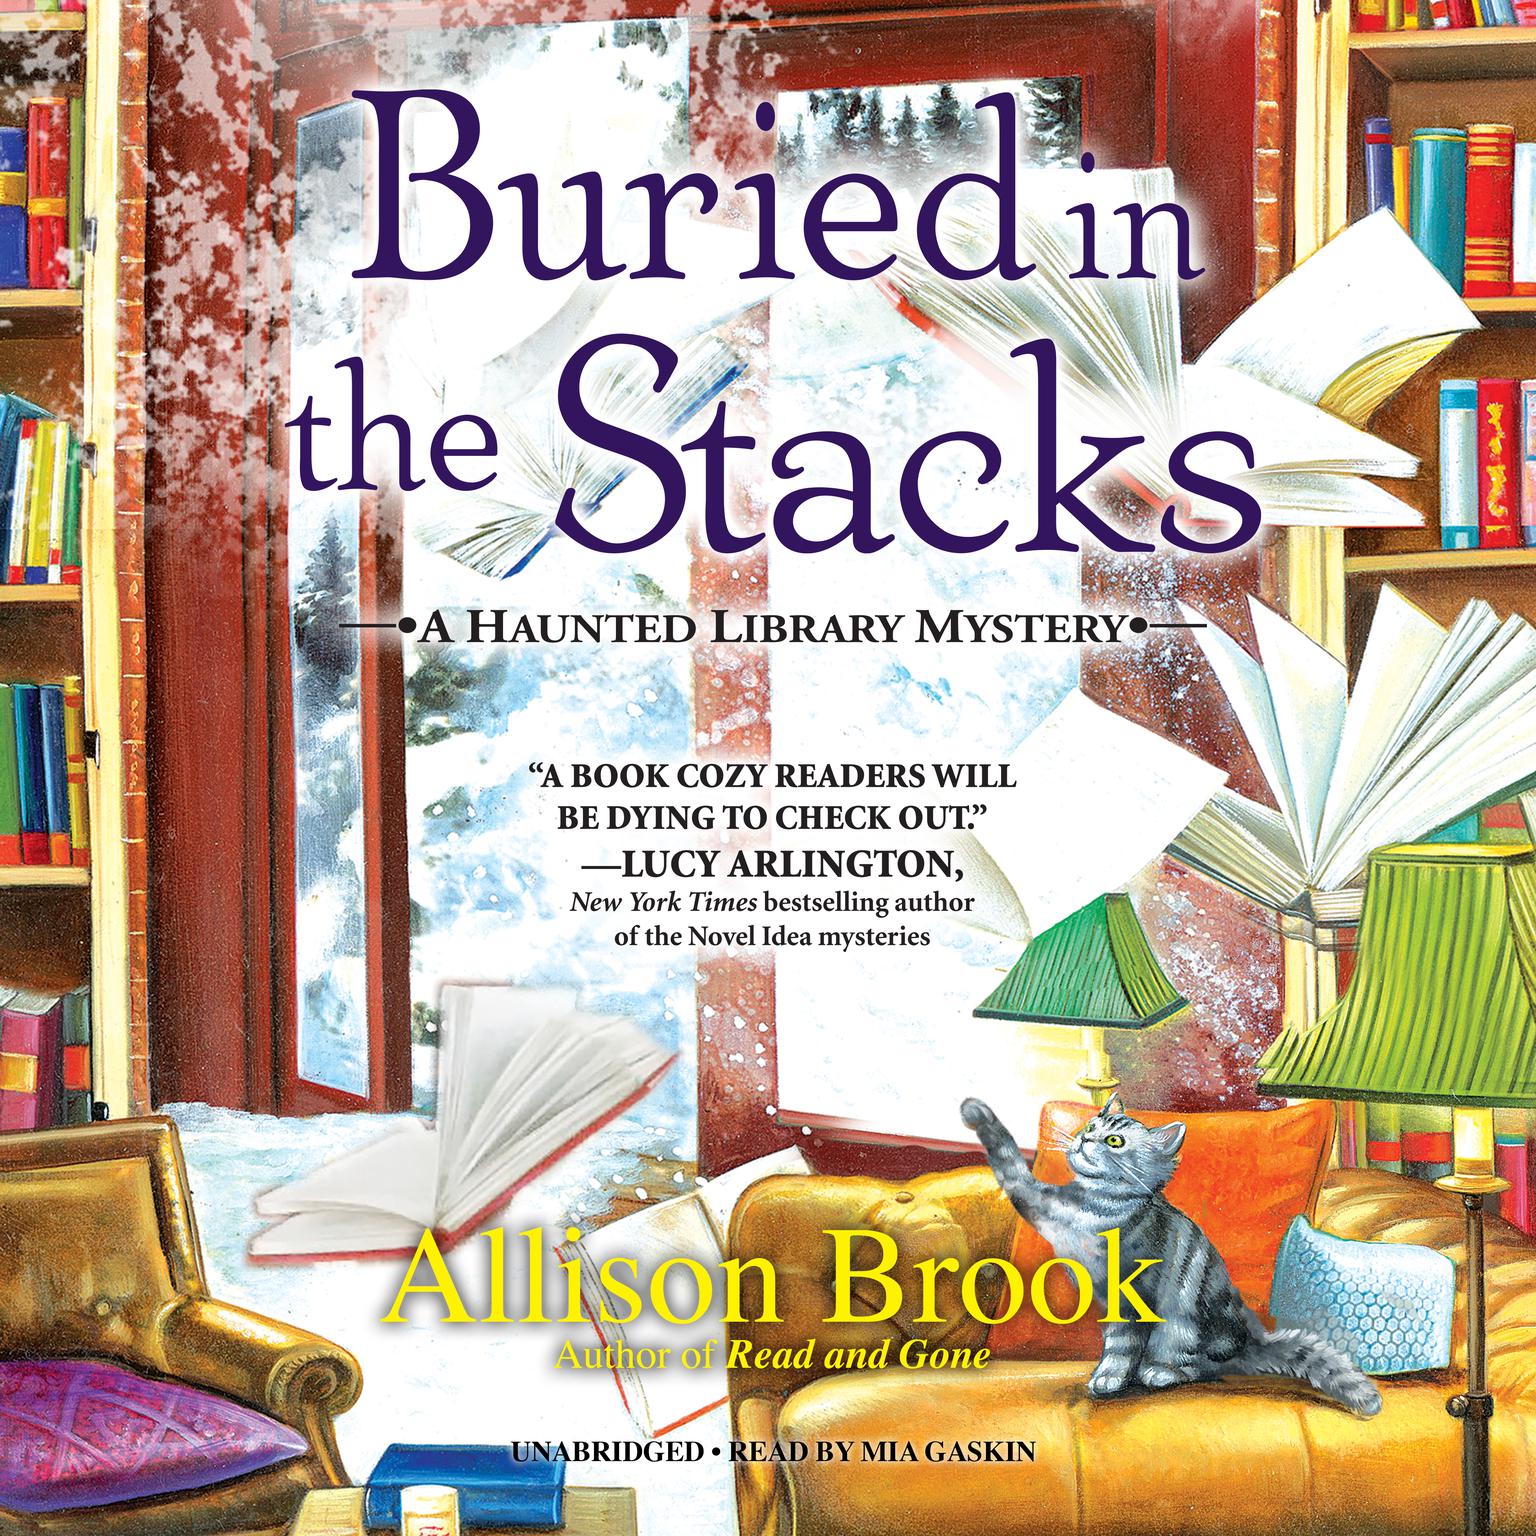 Buried in the Stacks: A Haunted Library Mystery Audiobook, by Allison Brook